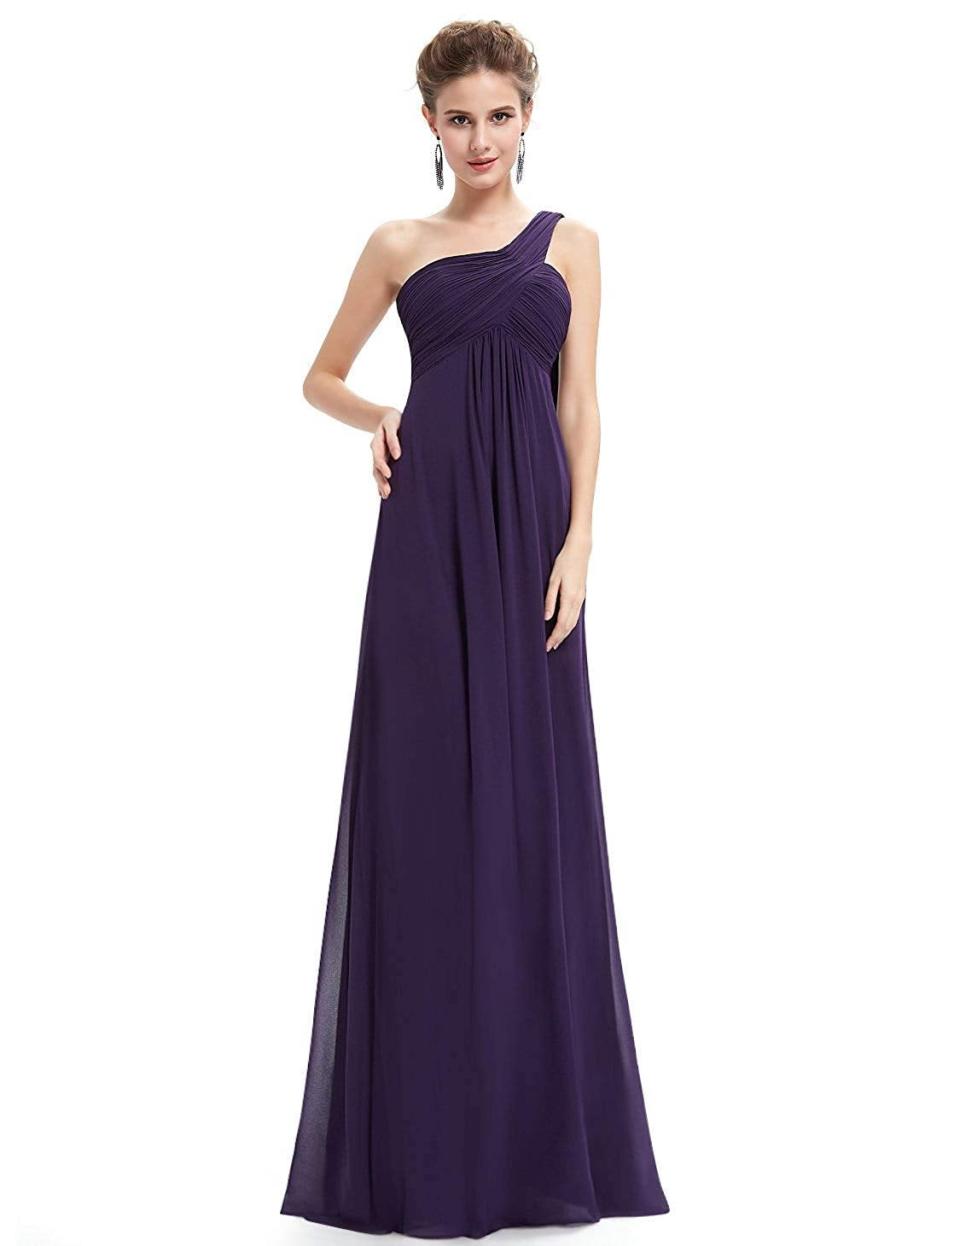 <h3><a href="https://amzn.to/2vHFJZC" rel="nofollow noopener" target="_blank" data-ylk="slk:One-Shoulder Gown" class="link rapid-noclick-resp">One-Shoulder Gown</a></h3><br><strong>Arianna </strong><br><br><strong>How She Discovered It:</strong> "I was going to a black-tie wedding and didn't want to spend a lot of money on a dress, and I had an Amazon gift card so...I googled formal dresses on Amazon and found one with rave reviews. A lot of girls mentioned using it as a bridesmaid dress!"<br><br><strong>Why It's A Hidden Gem:</strong> "I only paid $50 for it, I got a lot of compliments on it, AND have turned multiple people onto the same dress — so a lot of my friends own it as well."<br><br><strong>Ever Pretty</strong> One-Shoulder Evening Dress, $, available at <a href="https://amzn.to/3doVJ6L" rel="nofollow noopener" target="_blank" data-ylk="slk:Amazon" class="link rapid-noclick-resp">Amazon</a>